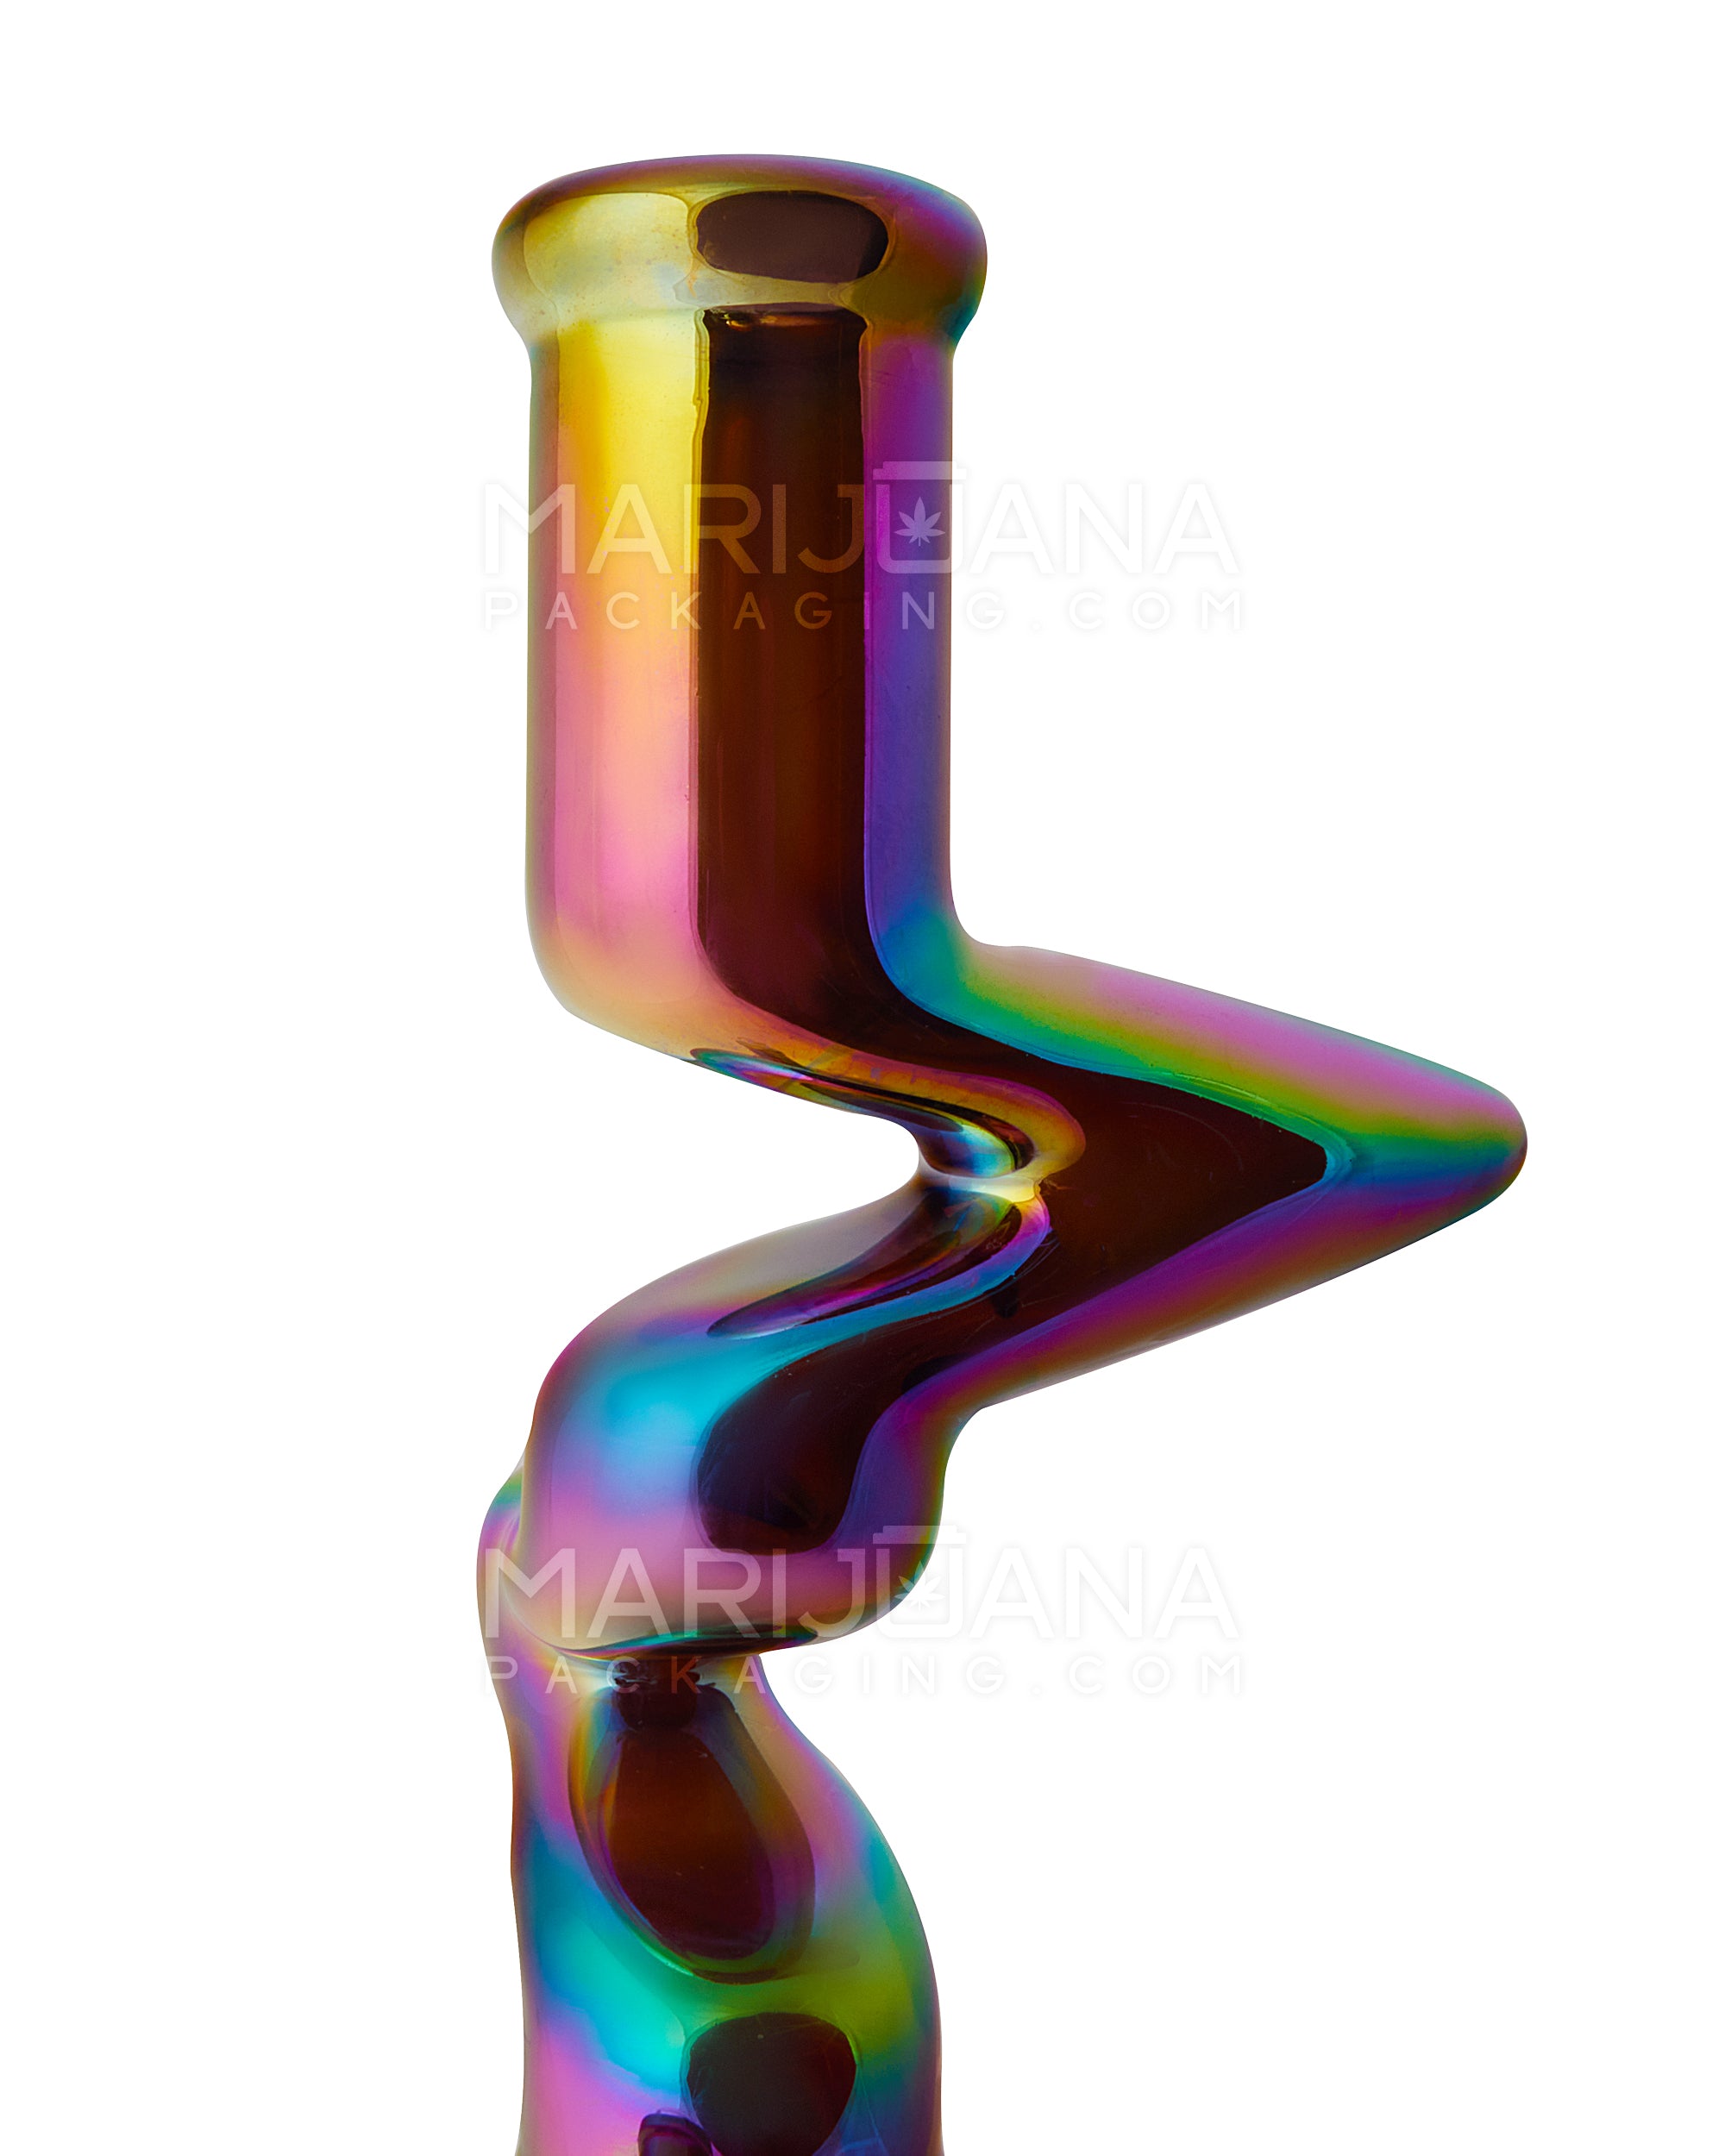 USA Glass | Z-Neck Heavy Zong Glass Beaker Water Pipe | 14in Tall - 14mm Bowl - Assorted